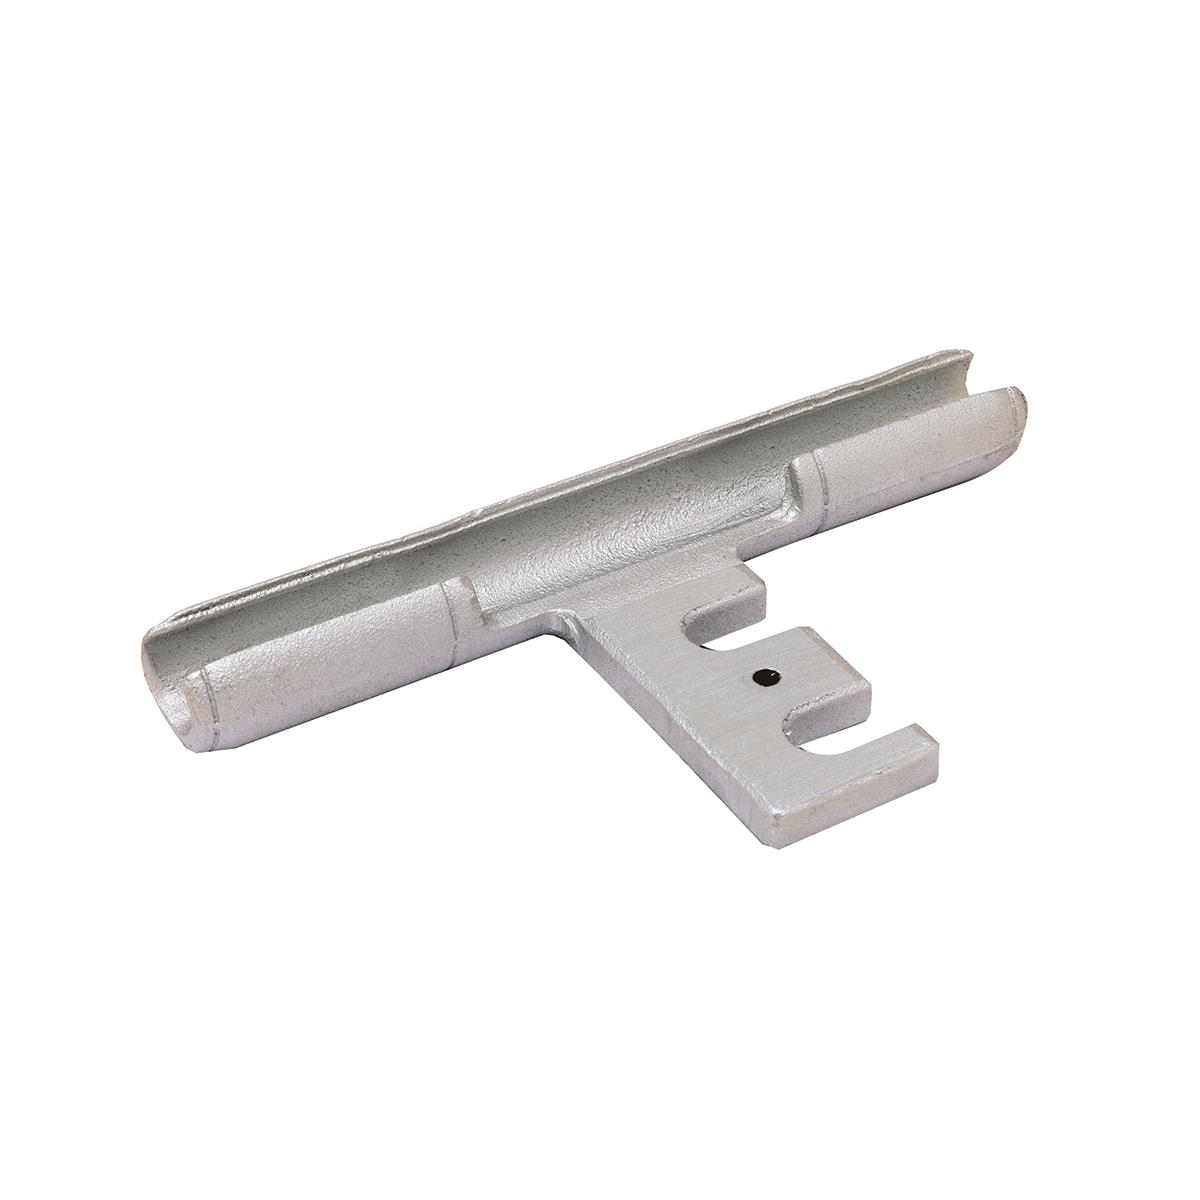 Hubbell YTA361R2N AL primary T-tap connector with slotted tap pad designed for easy disconnecting of tap conductor, For use with Types YKA-R-2N and YKA-A-2N, Barrel Length: 3.88 IN.  ; Features: Aluminum Primary T-Tap Connector With Slotted Tap Pad Designed For Easy Discon